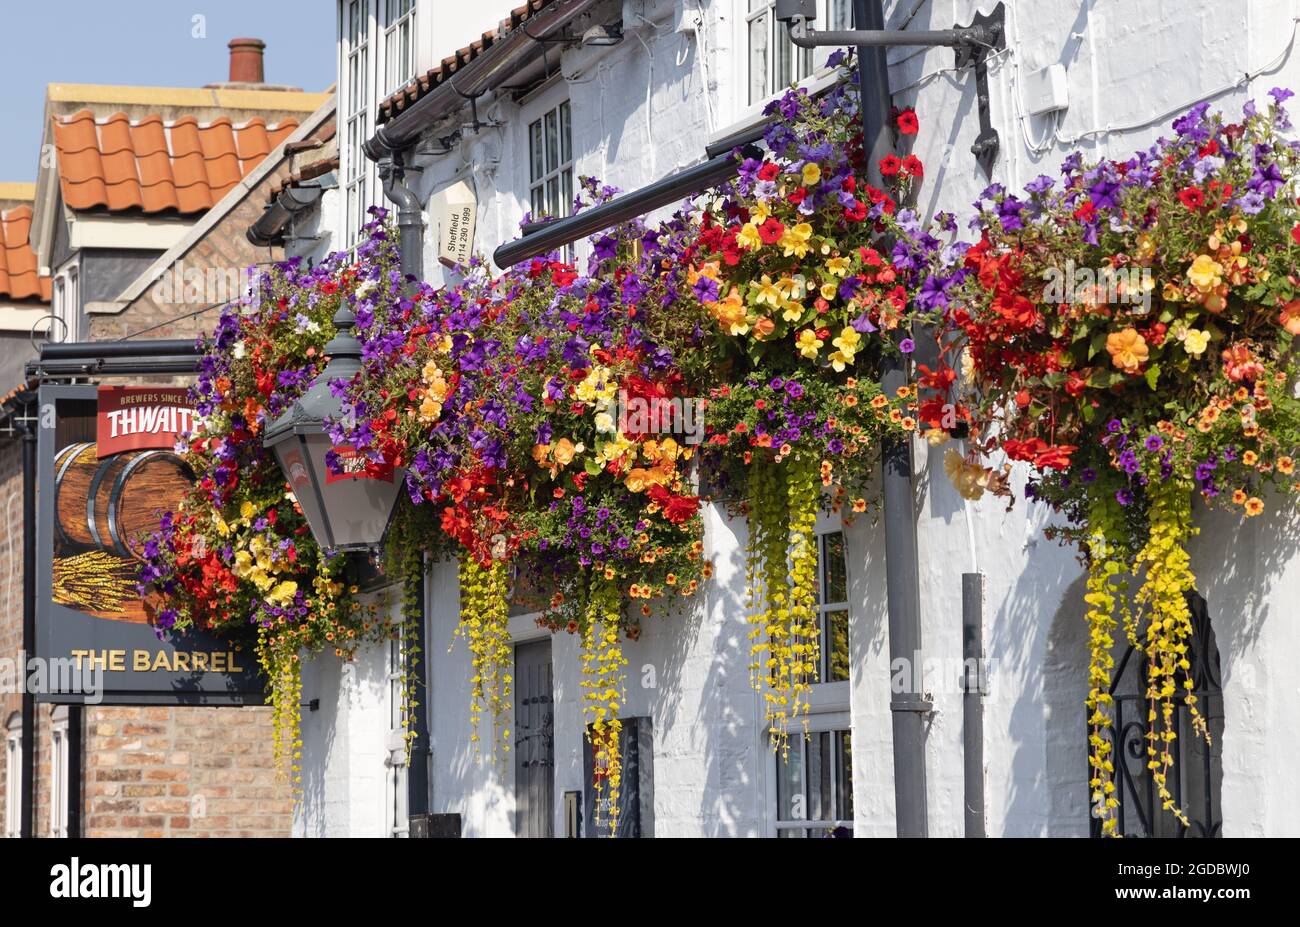 Traditional pub UK; The Barrel, a traditional english pub decked with colourful flowers in hanging baskets, Walkington, Beverley Yorkshire UK Stock Photo